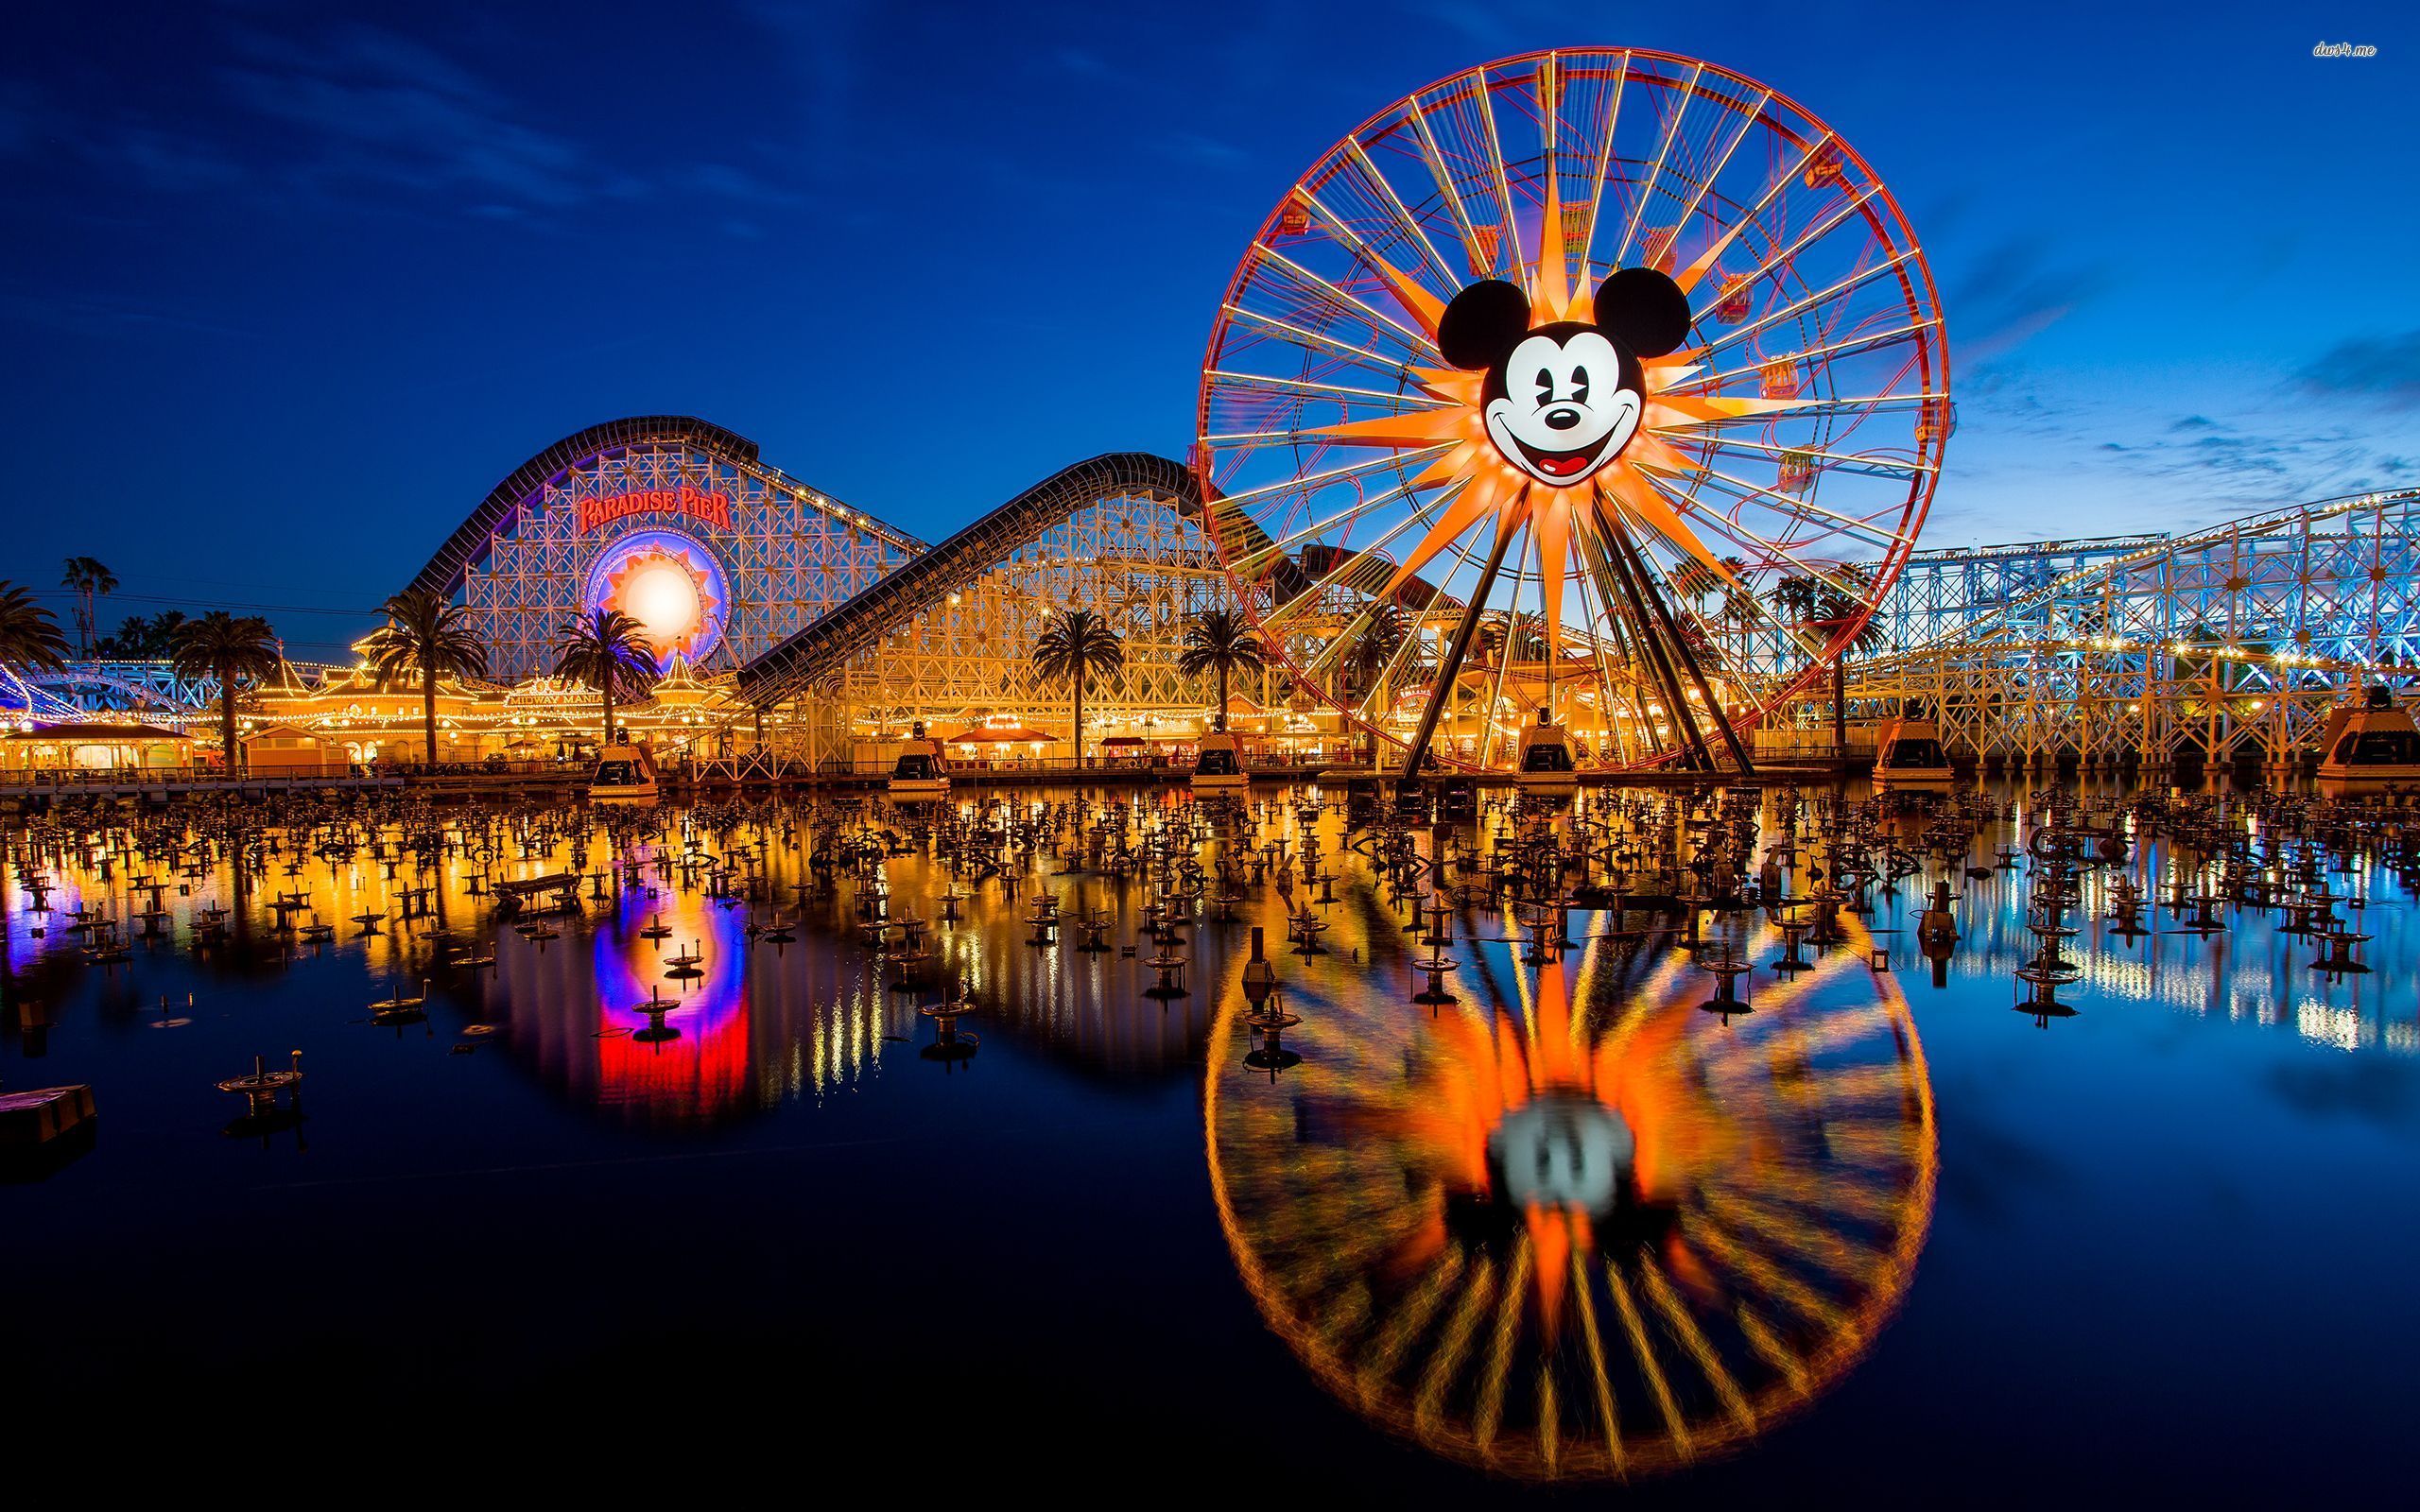 Mickey Mouse at the amusement park wallpaper - Travel wallpapers - #18930 - Disneyland